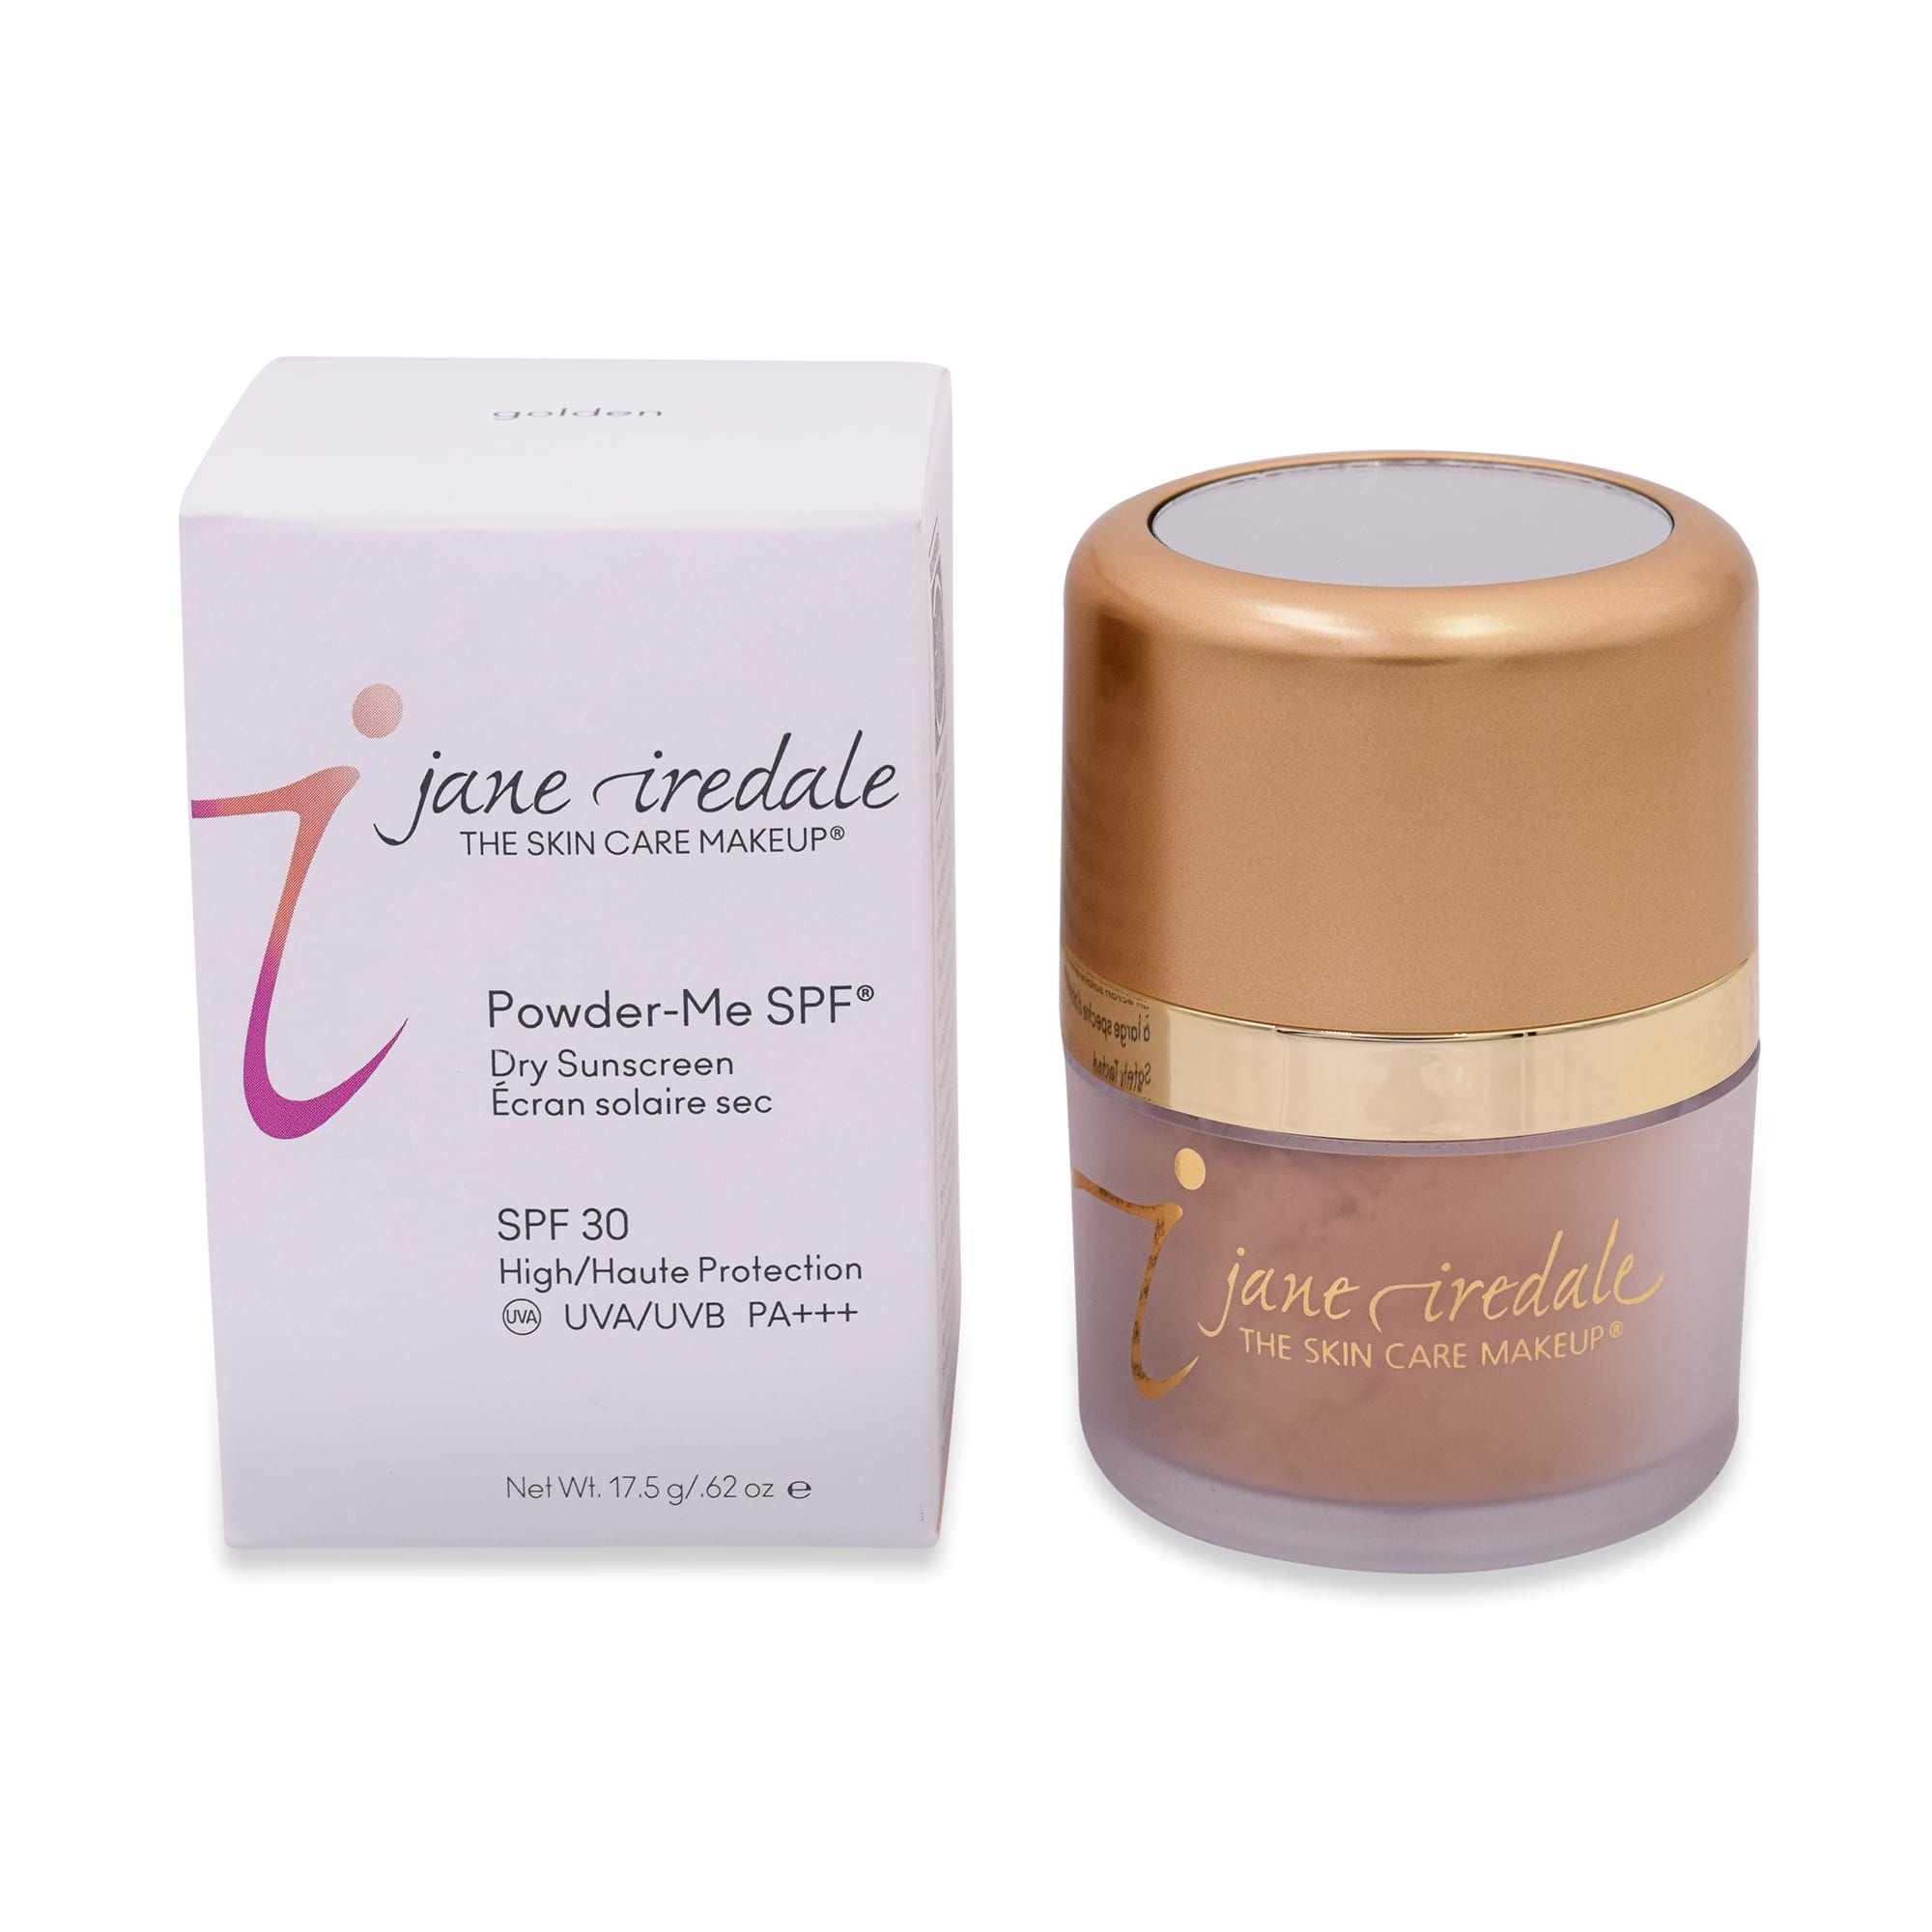 jane iredale Powder-Me SPF Dry Sunscreen Tanned 0.62 oz 